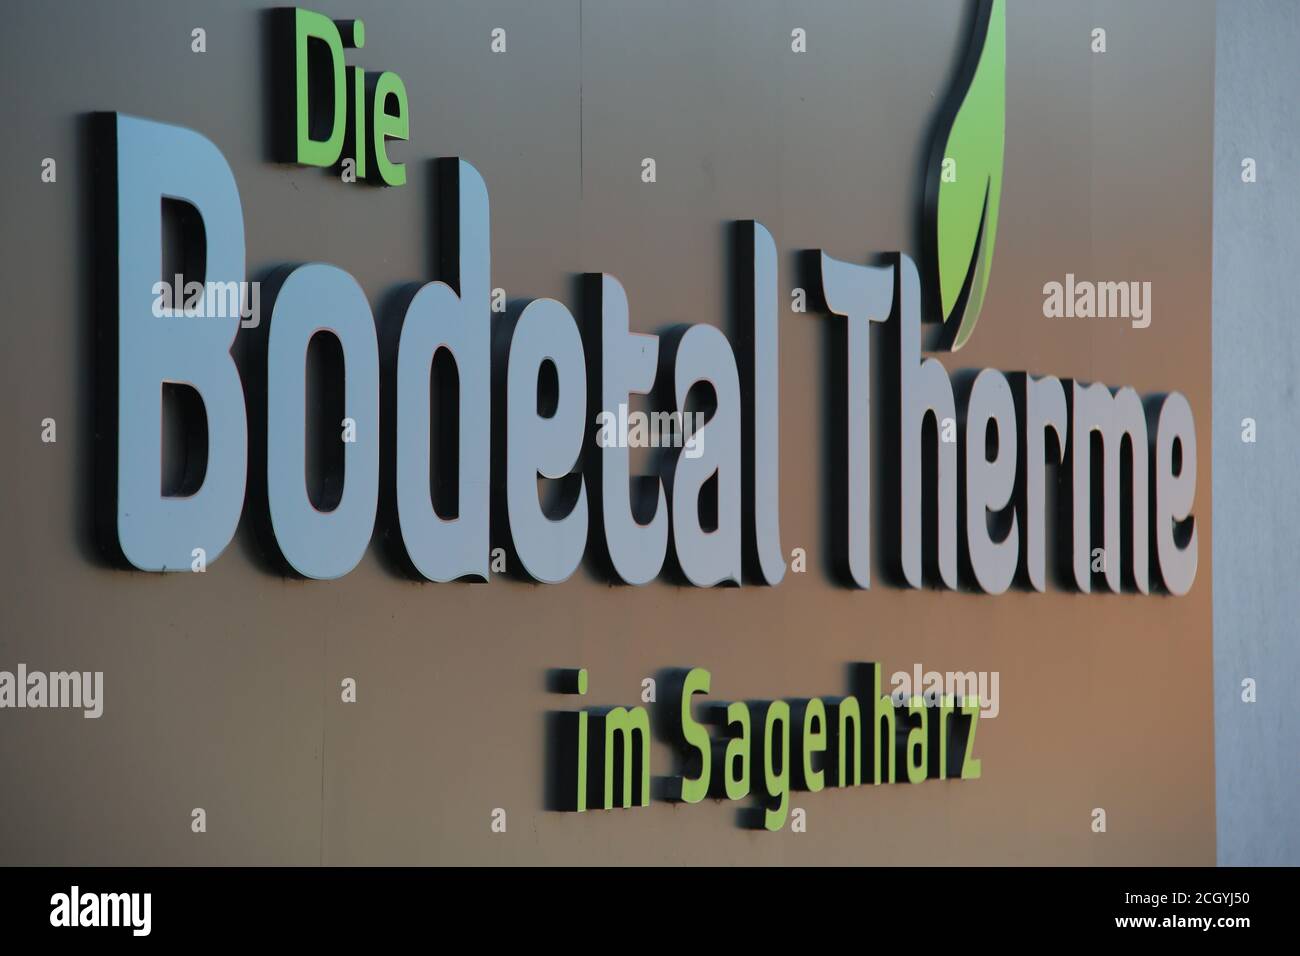 Thale, Germany. 11th Sep, 2020. The lettering "Die Bodetal Therme im Sagenharz" is located at the Bodetal Therme health and spa centre. The Bodetal Therme health and spa centre was reopened on 12.09.2020 after the Covid-19 closure and comprehensive renovation. Credit: Matthias Bein/dpa-Zentralbild/ZB/dpa/Alamy Live News Stock Photo